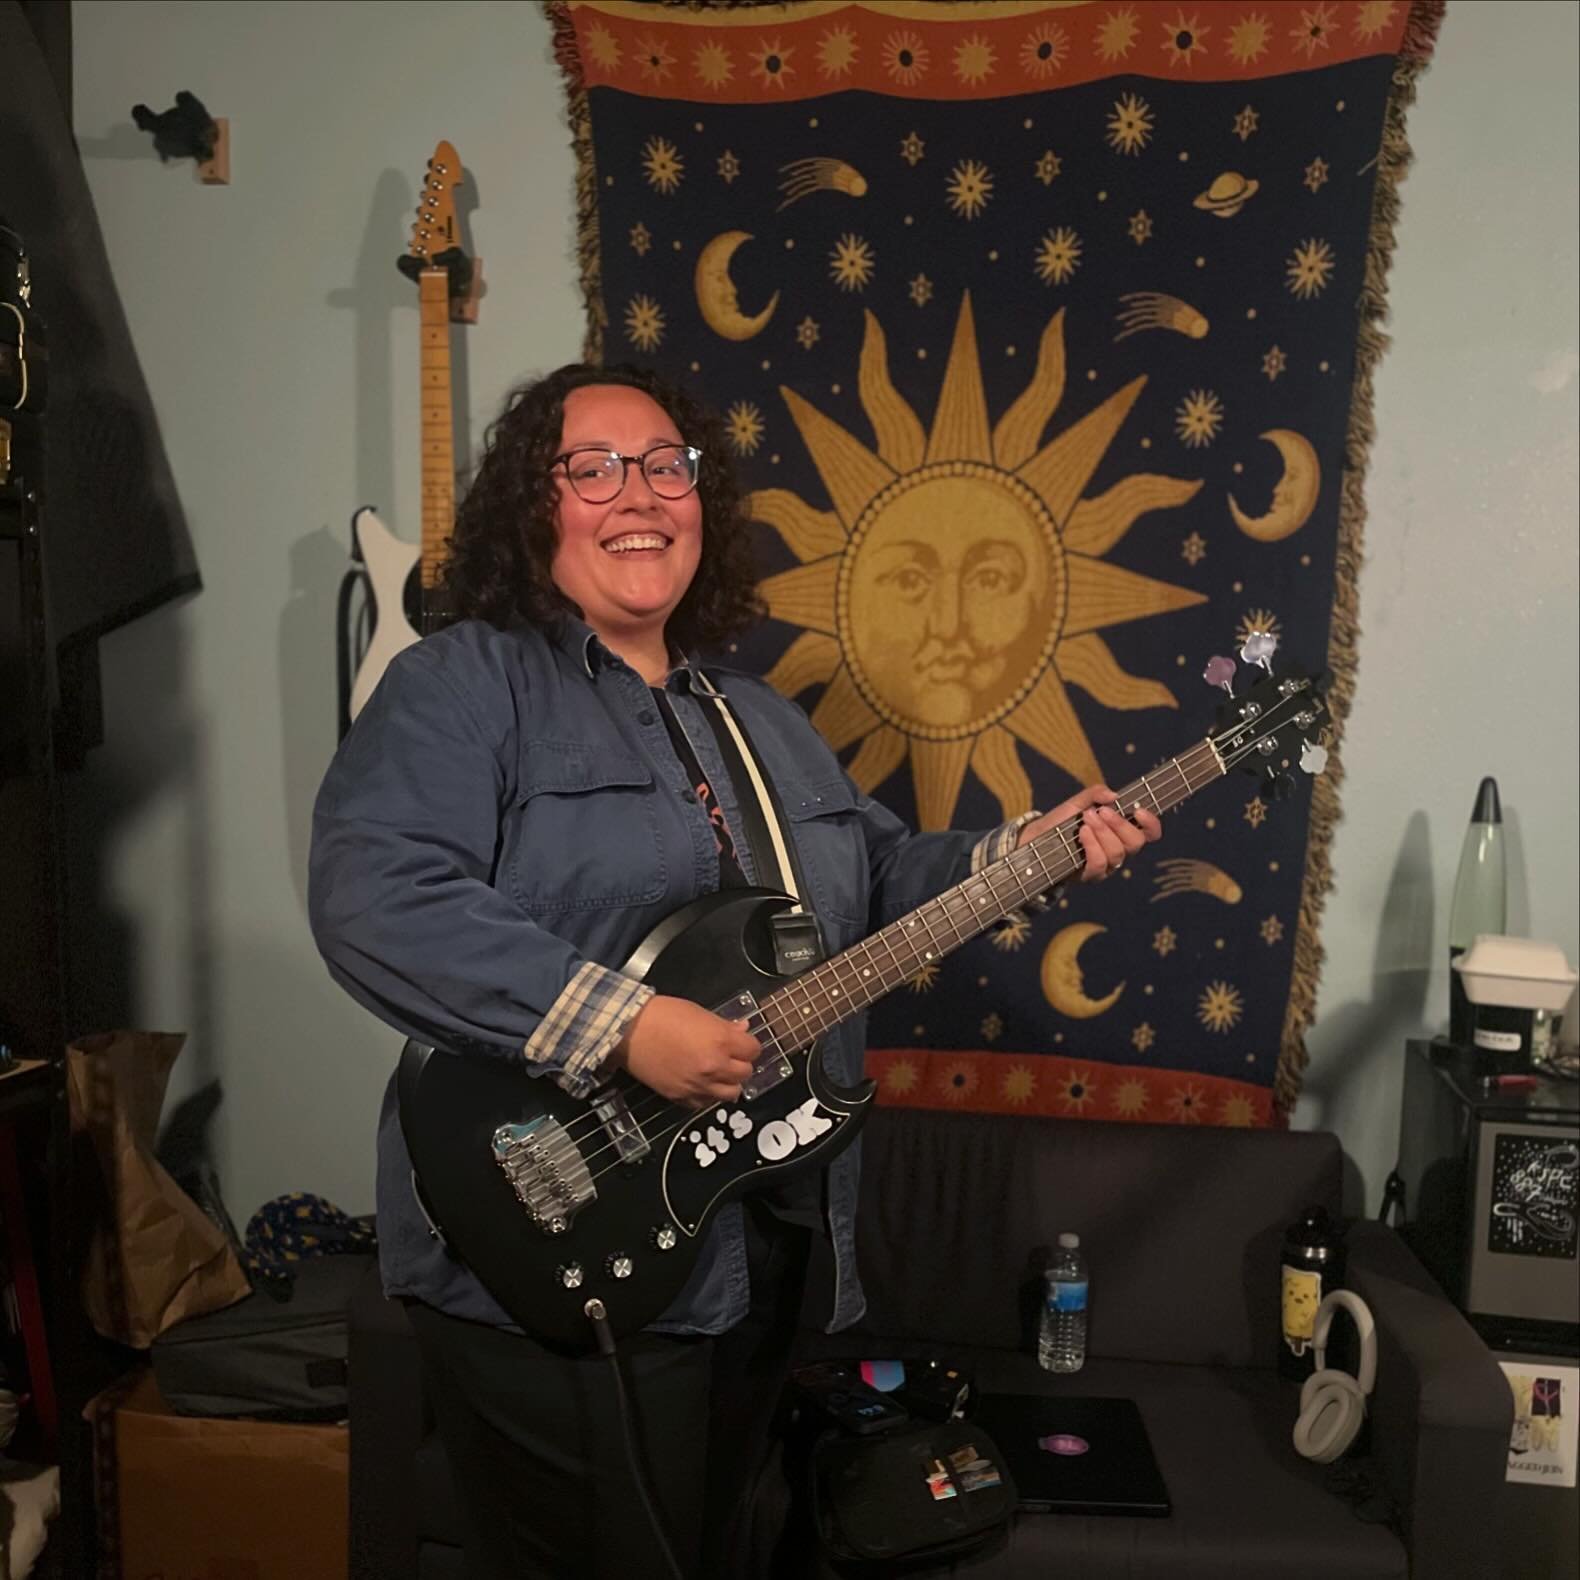 Barb was excited to jam tonight 🥳 

The next ep (Slice III) is getting mastered right now! Excited to release the first single this summer - keep your 👀 peeled for it!

.

.

.

#longbeachmusic #sliceband #clubbitch #localmusic #longbeachmusicscene